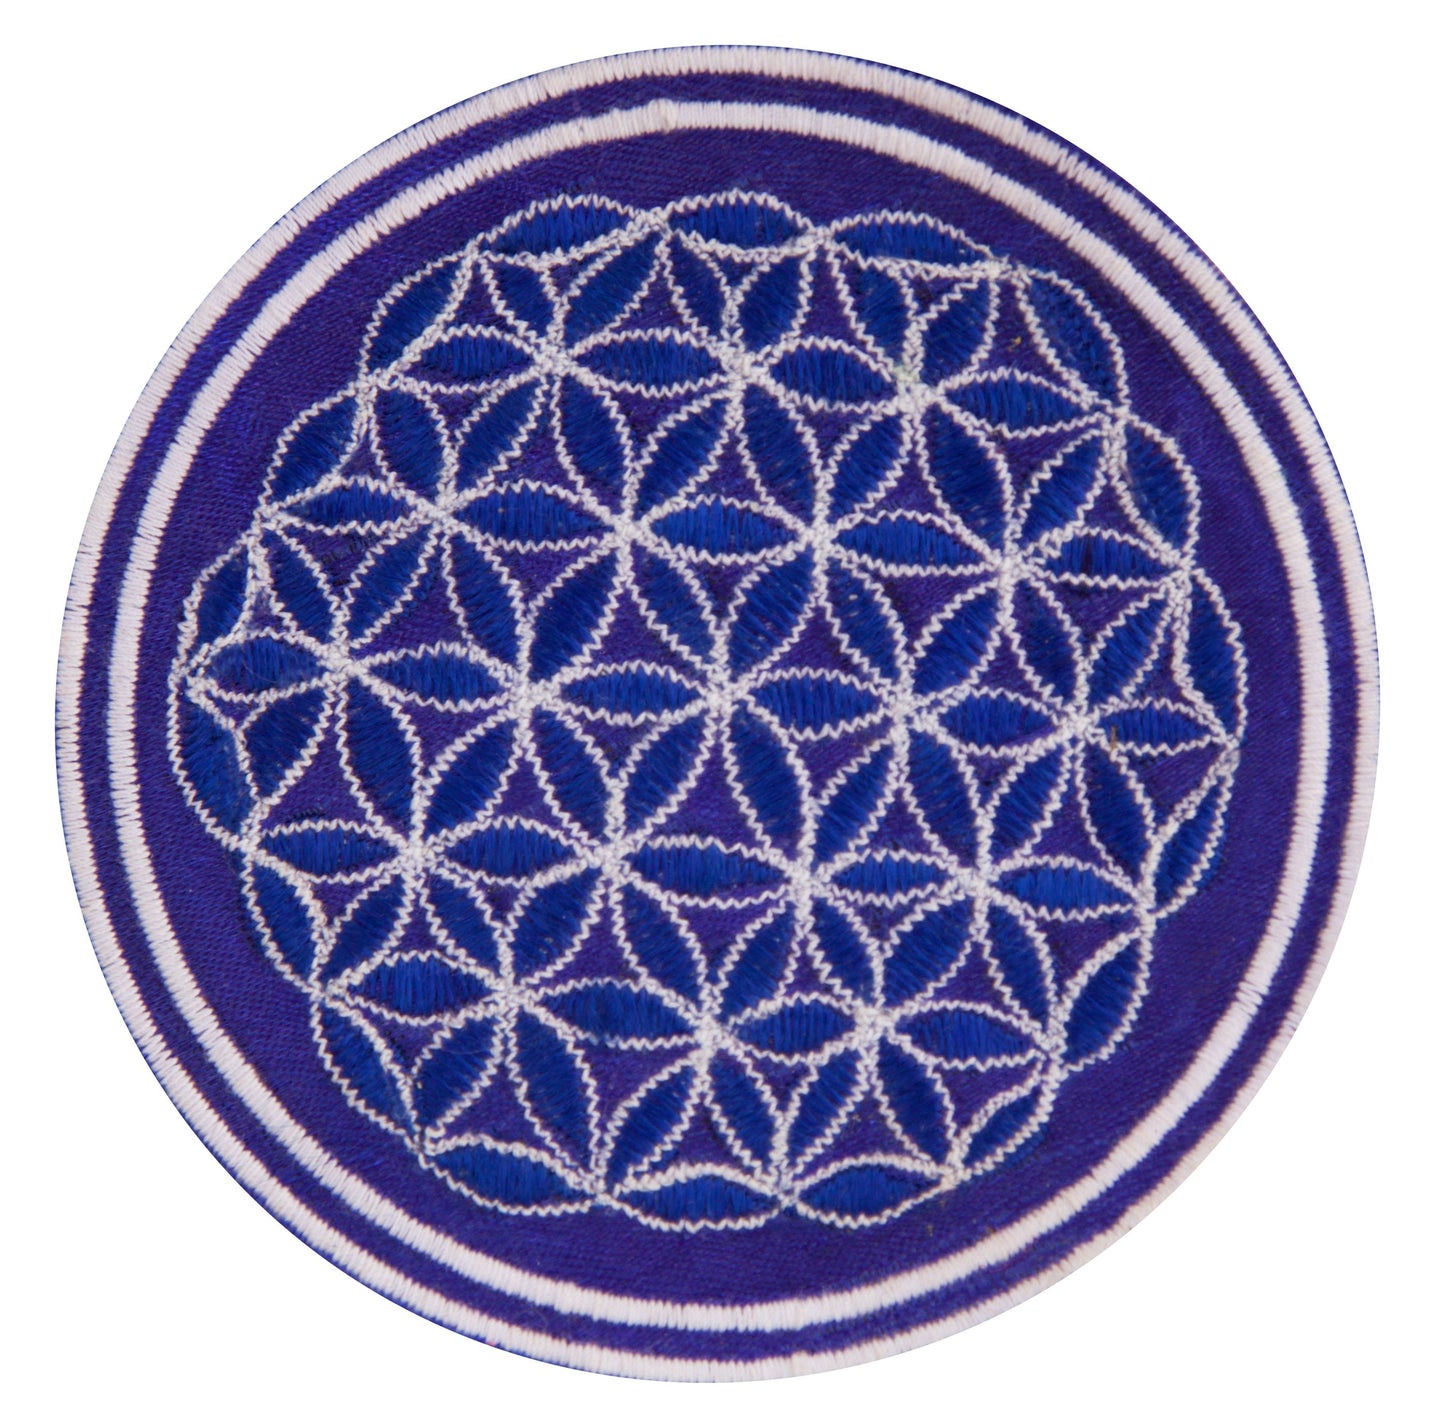 Flower of Life patch small size embroidery for sew on or as sacred geometry decoration holy pattern healing structure Drunvalo Melchizedek